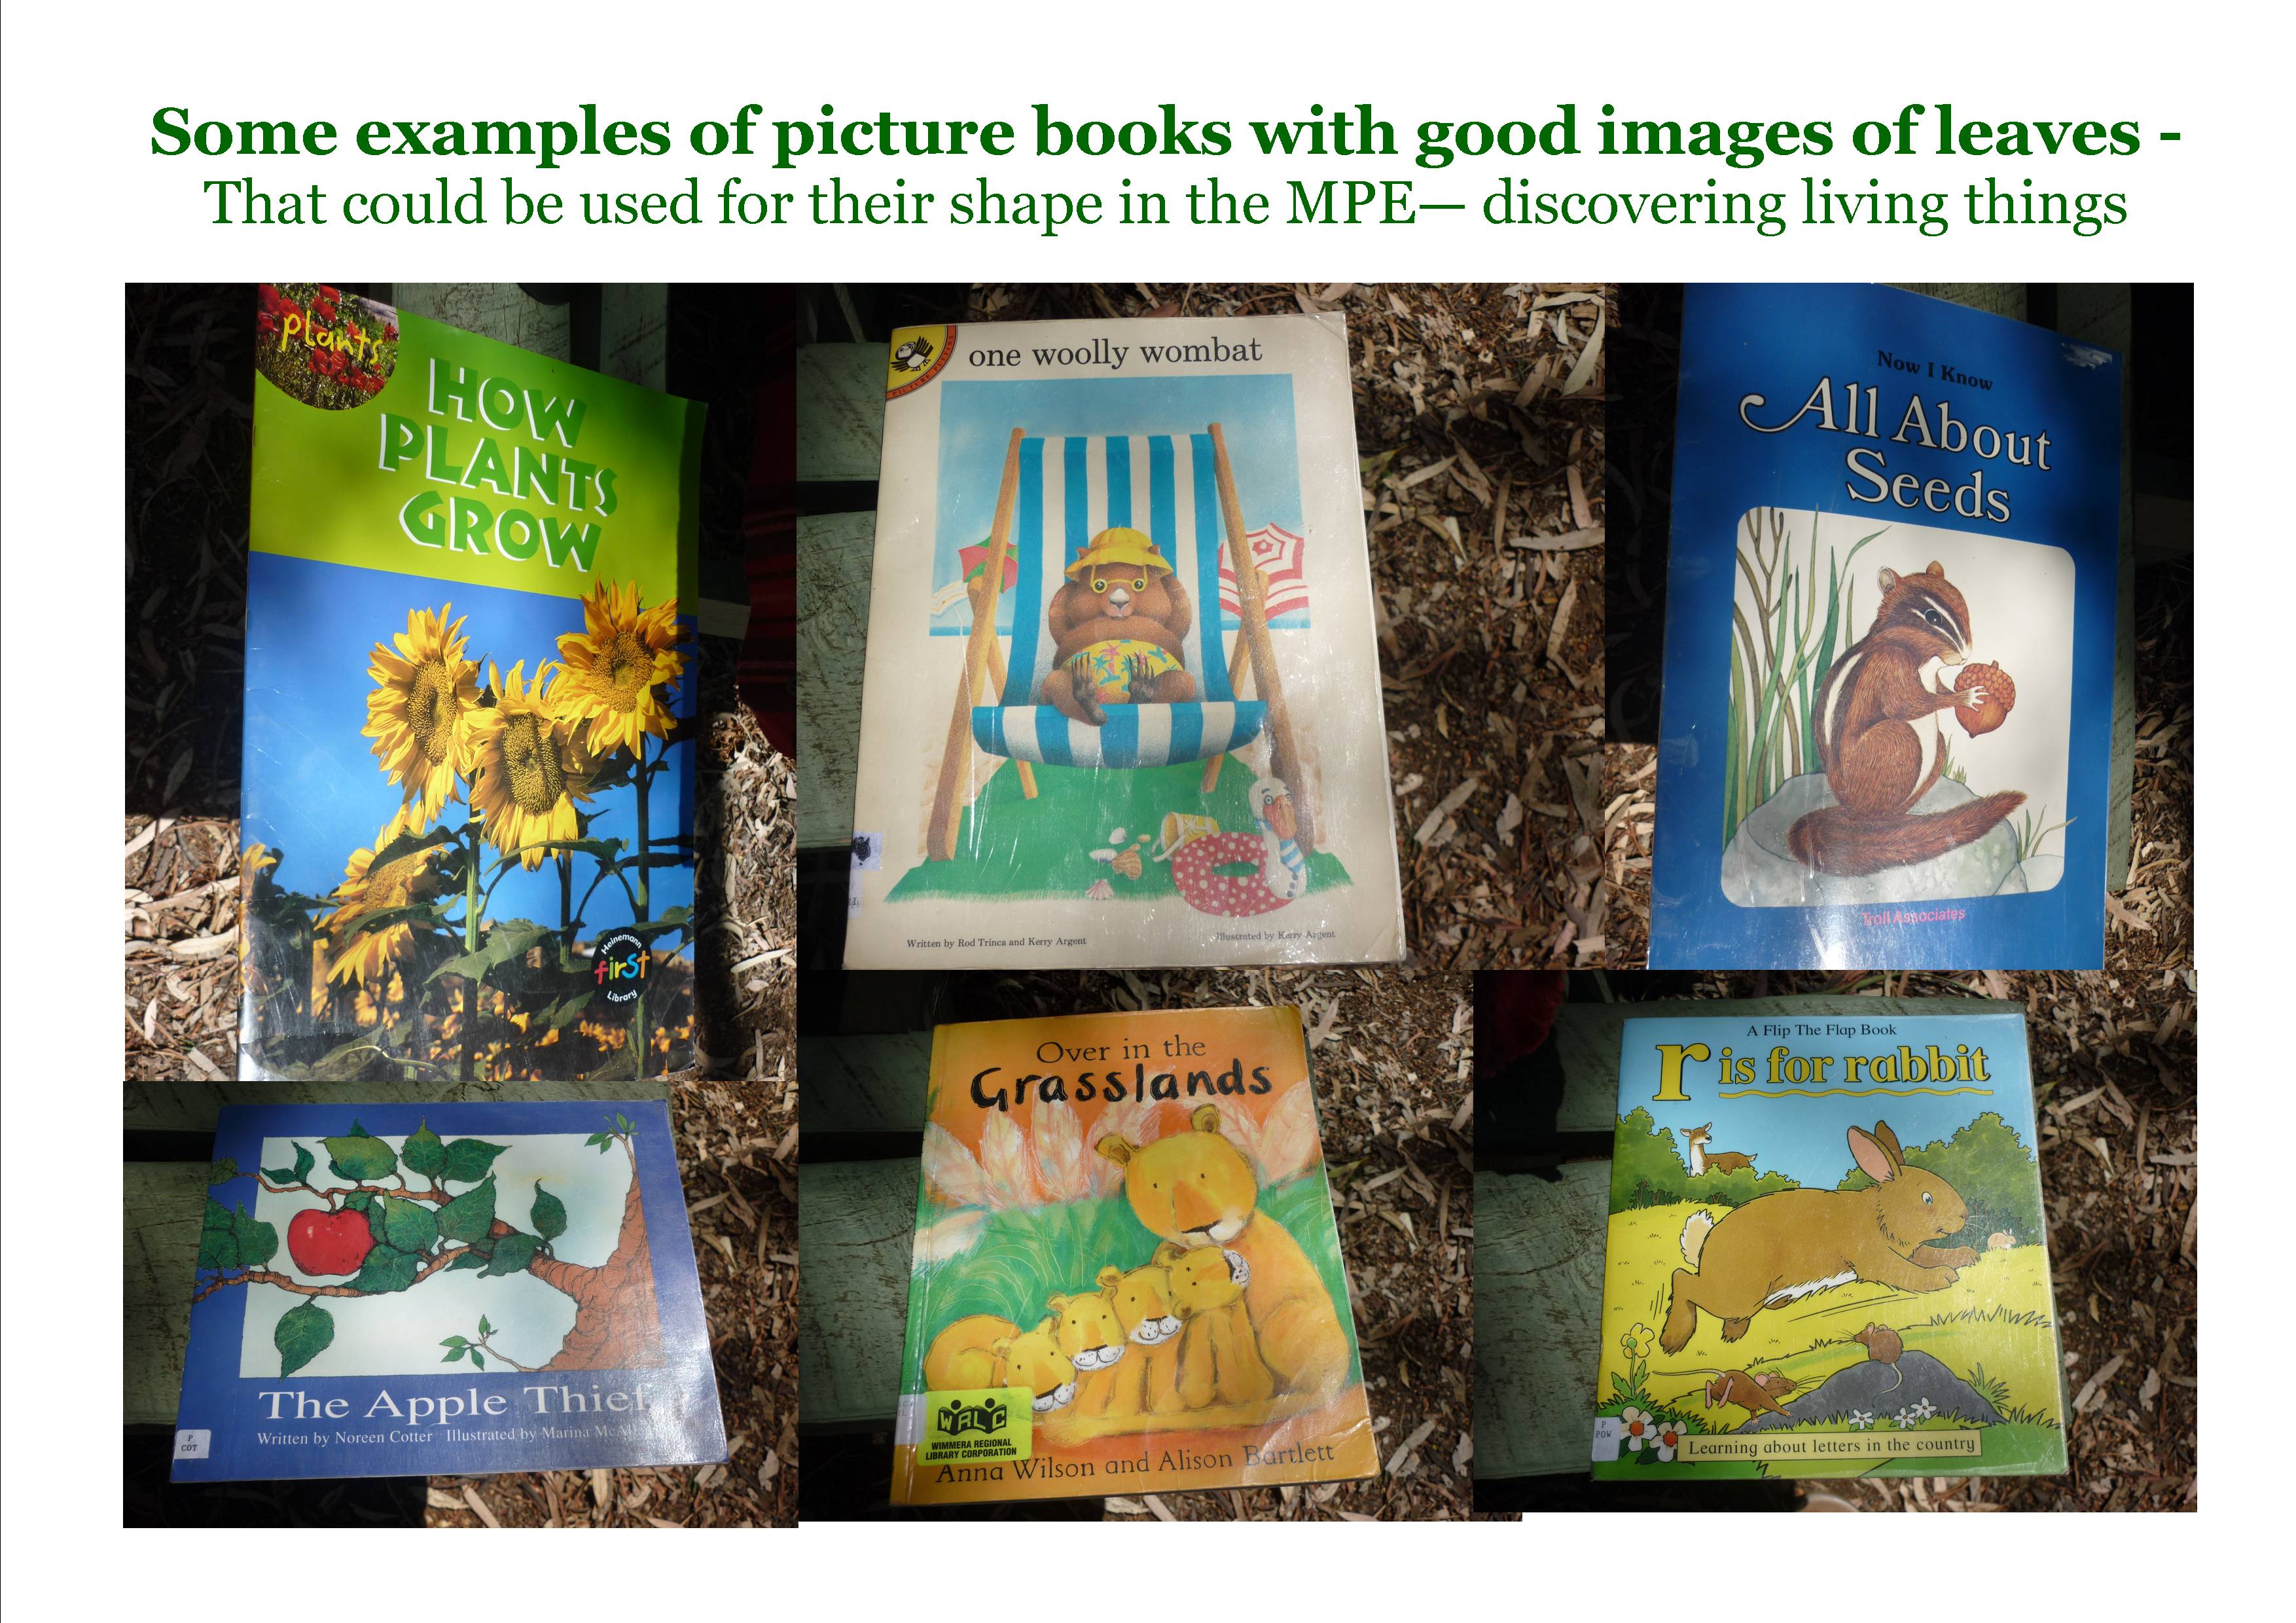 books with good leaf images